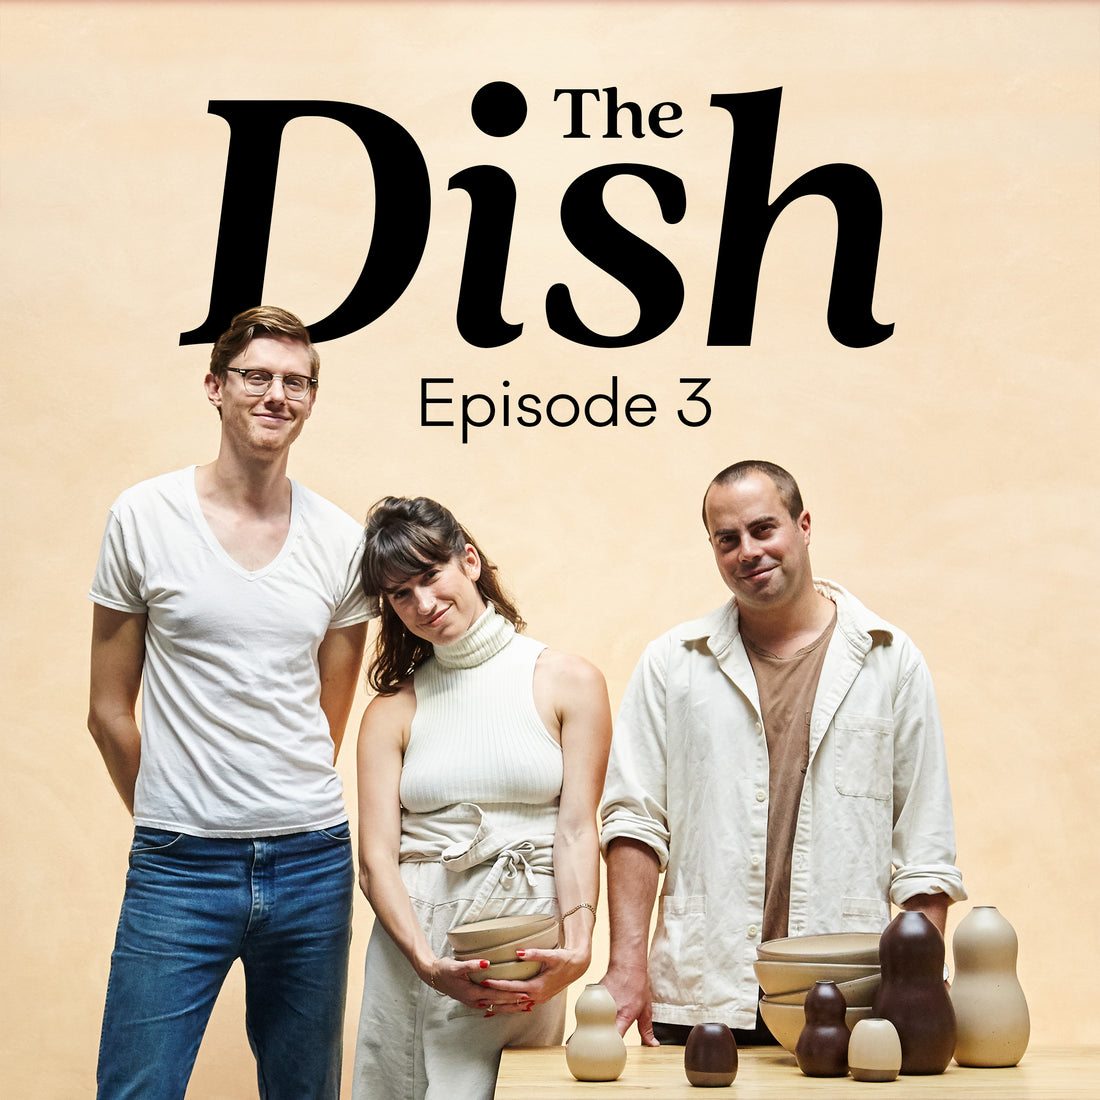 The Dish Episode 3